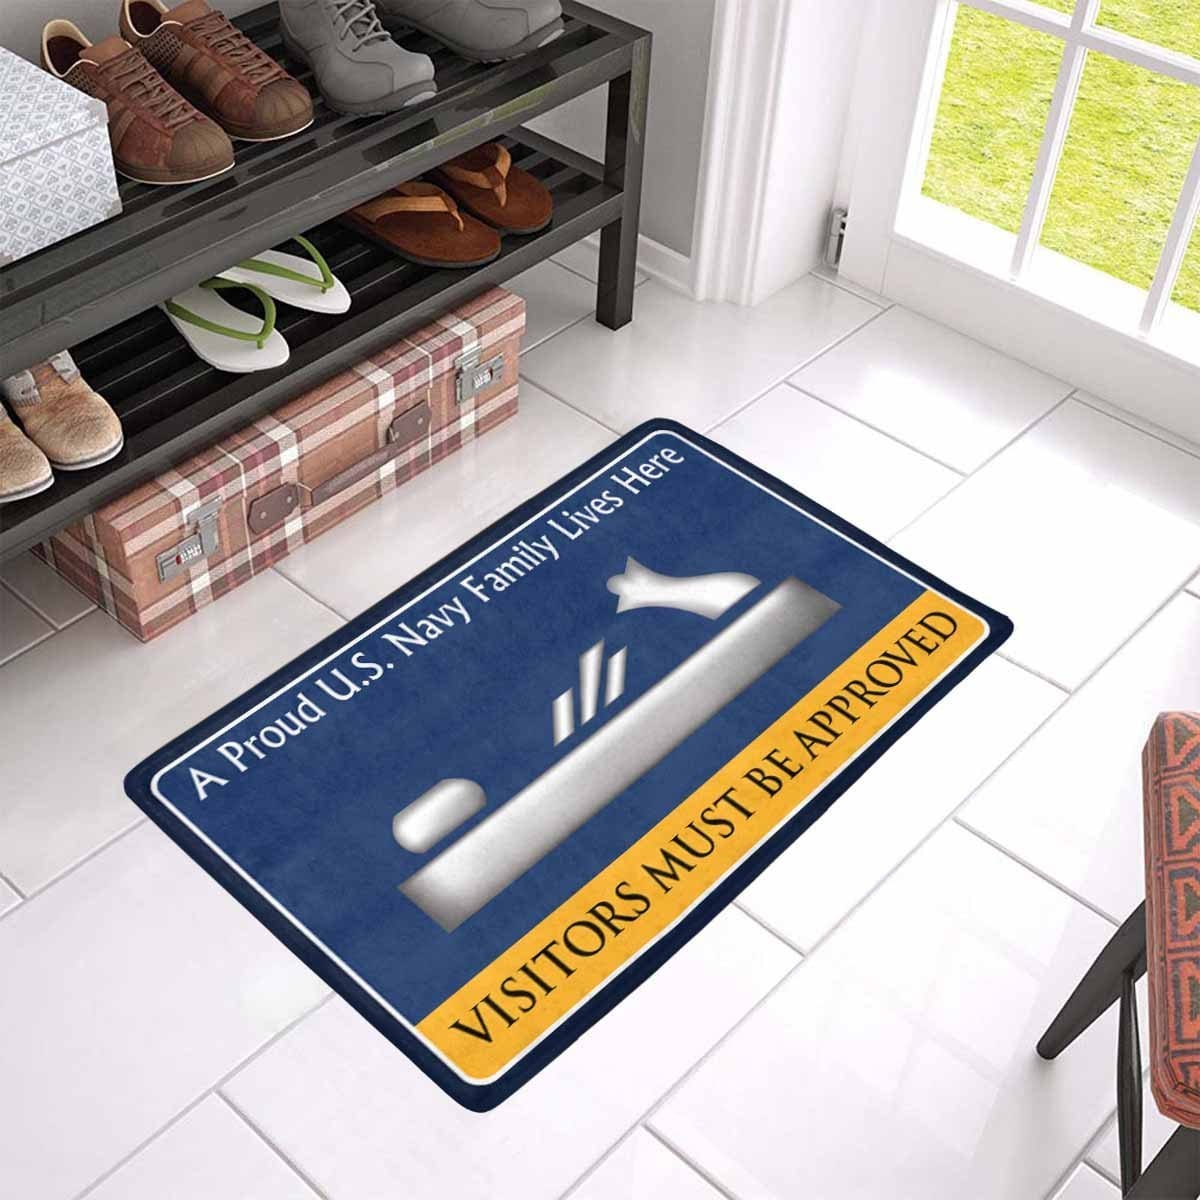 Navy Patternmaker Navy PM Family Doormat - Visitors must be approved (23,6 inches x 15,7 inches)-Doormat-Navy-Rate-Veterans Nation